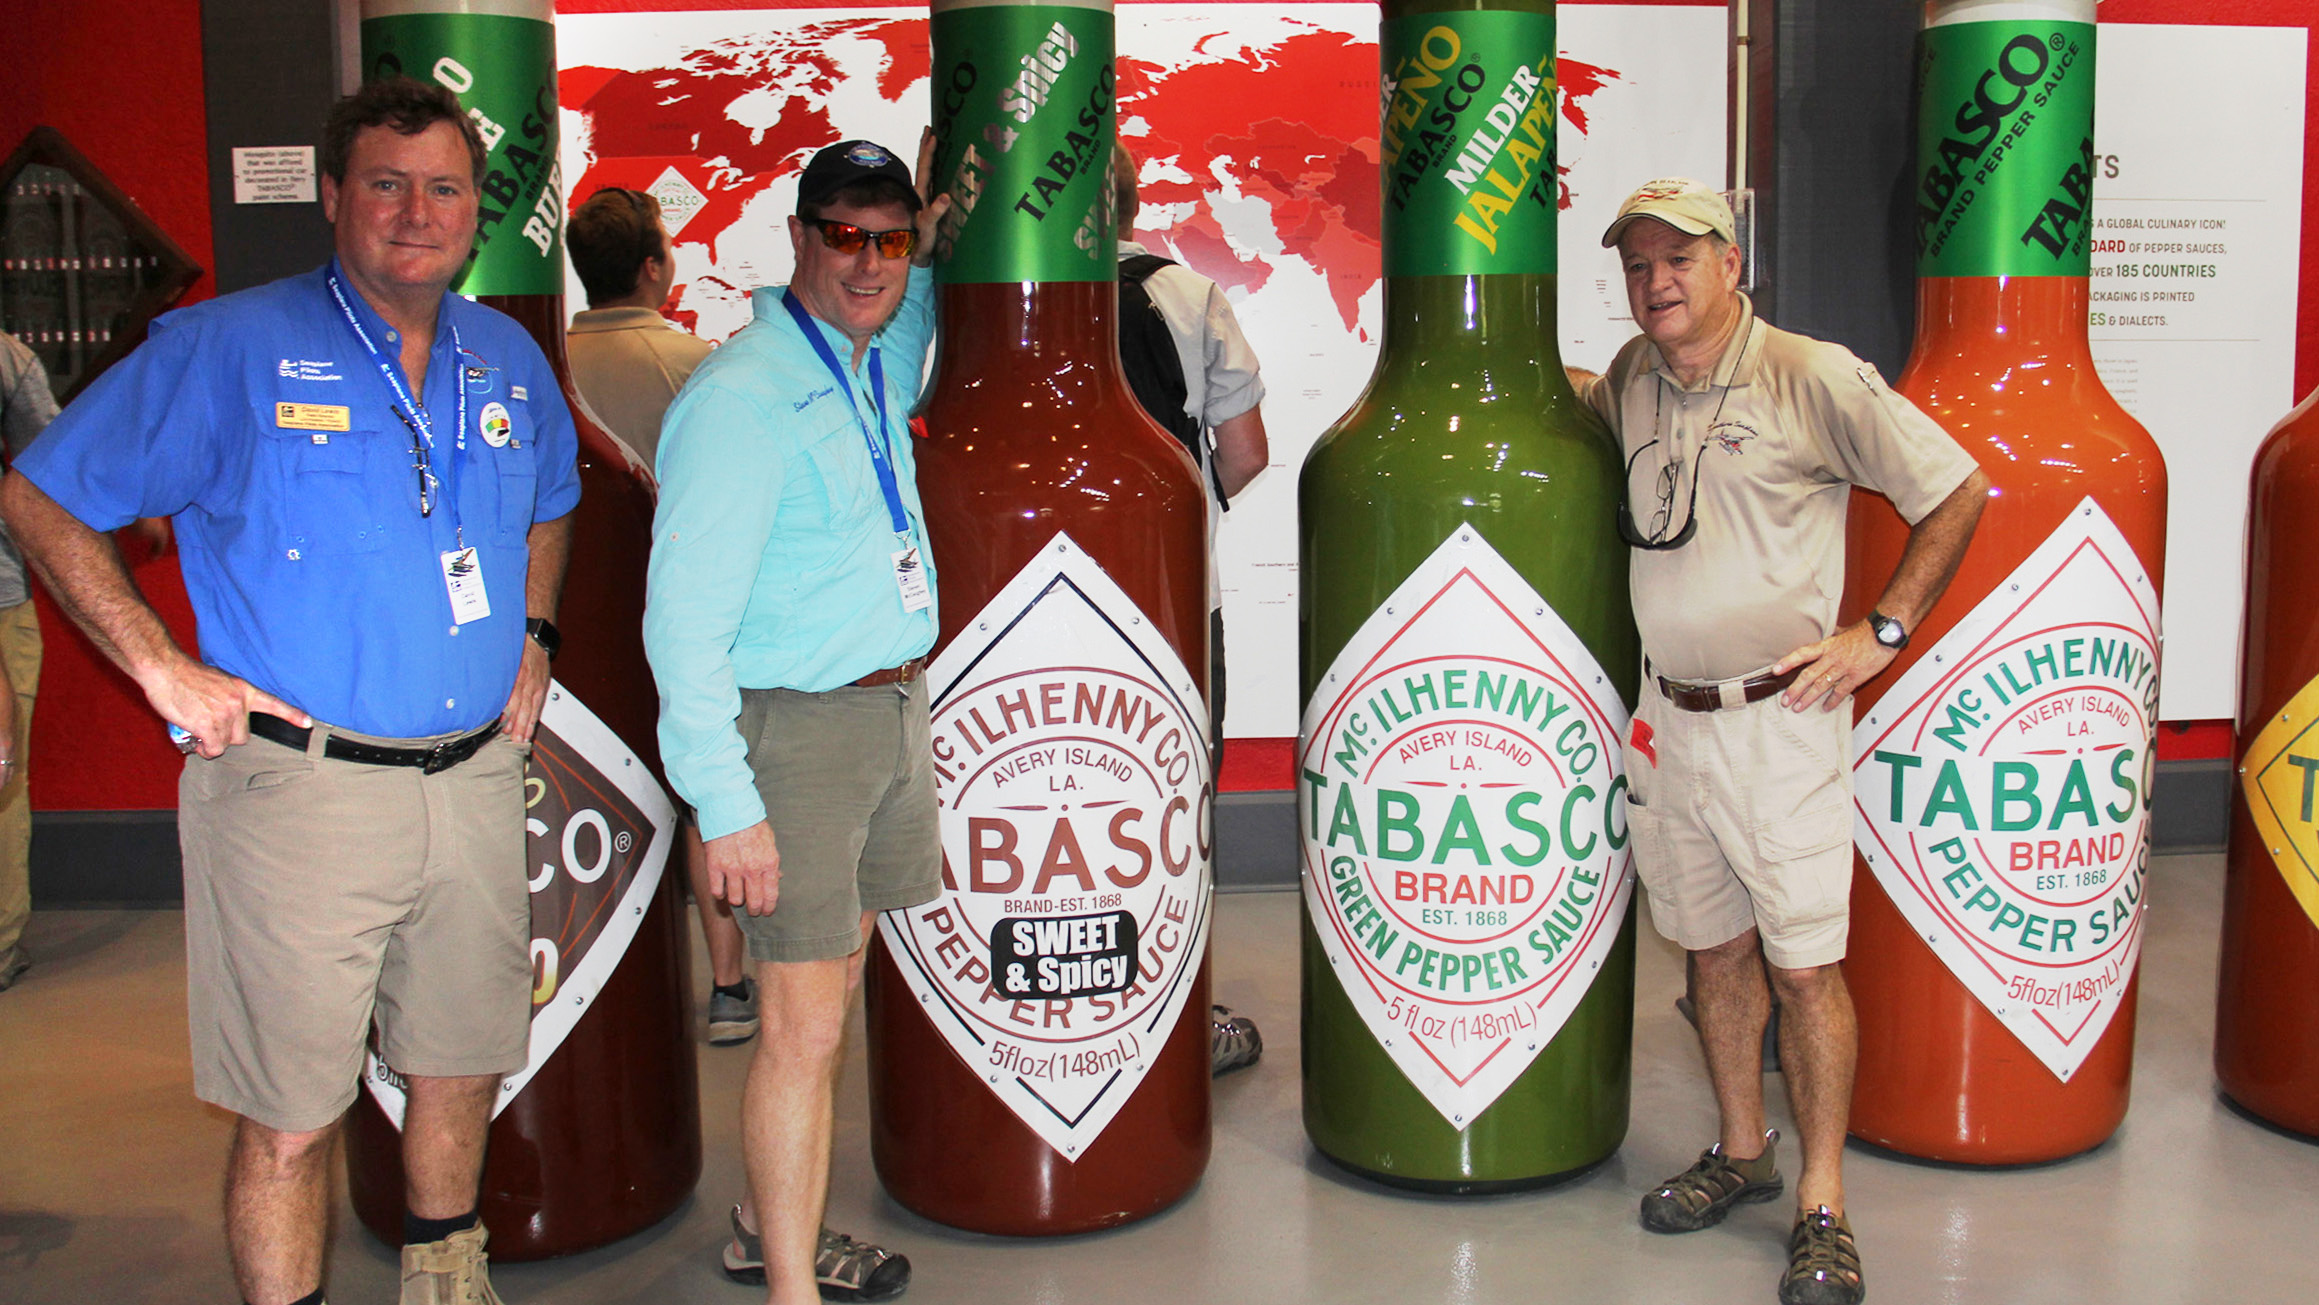 Spice things up at the Tabasco factory - AOPA